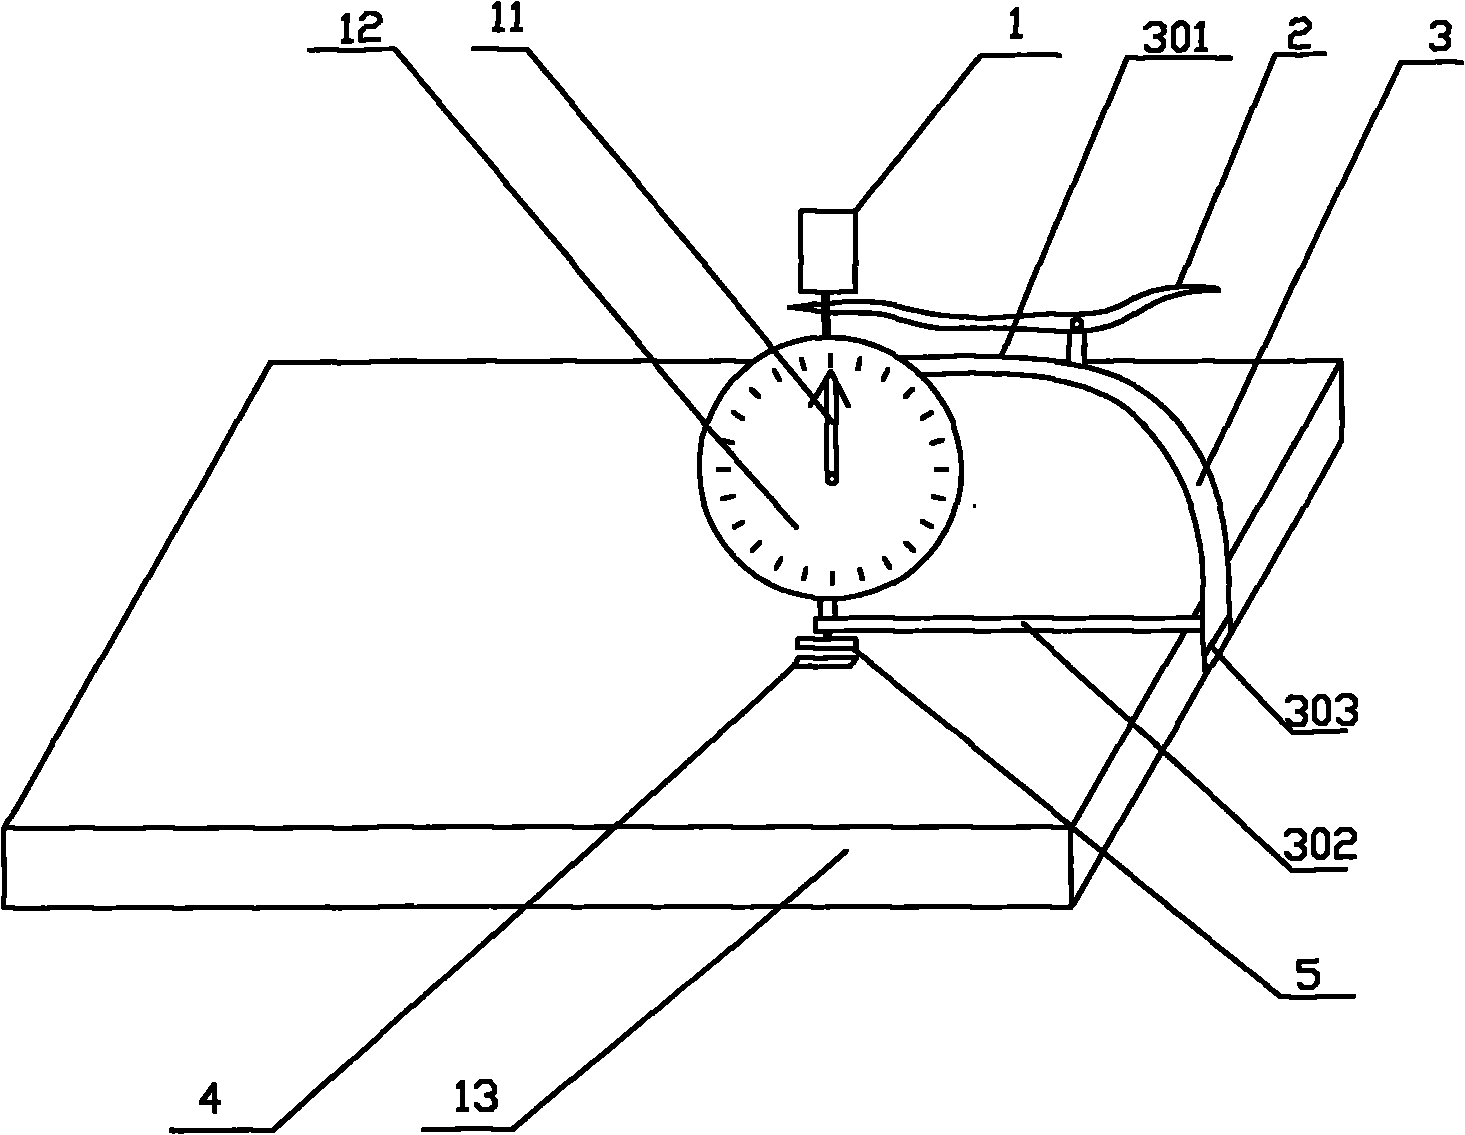 Device for measuring thickness of rubber-coated steel cord